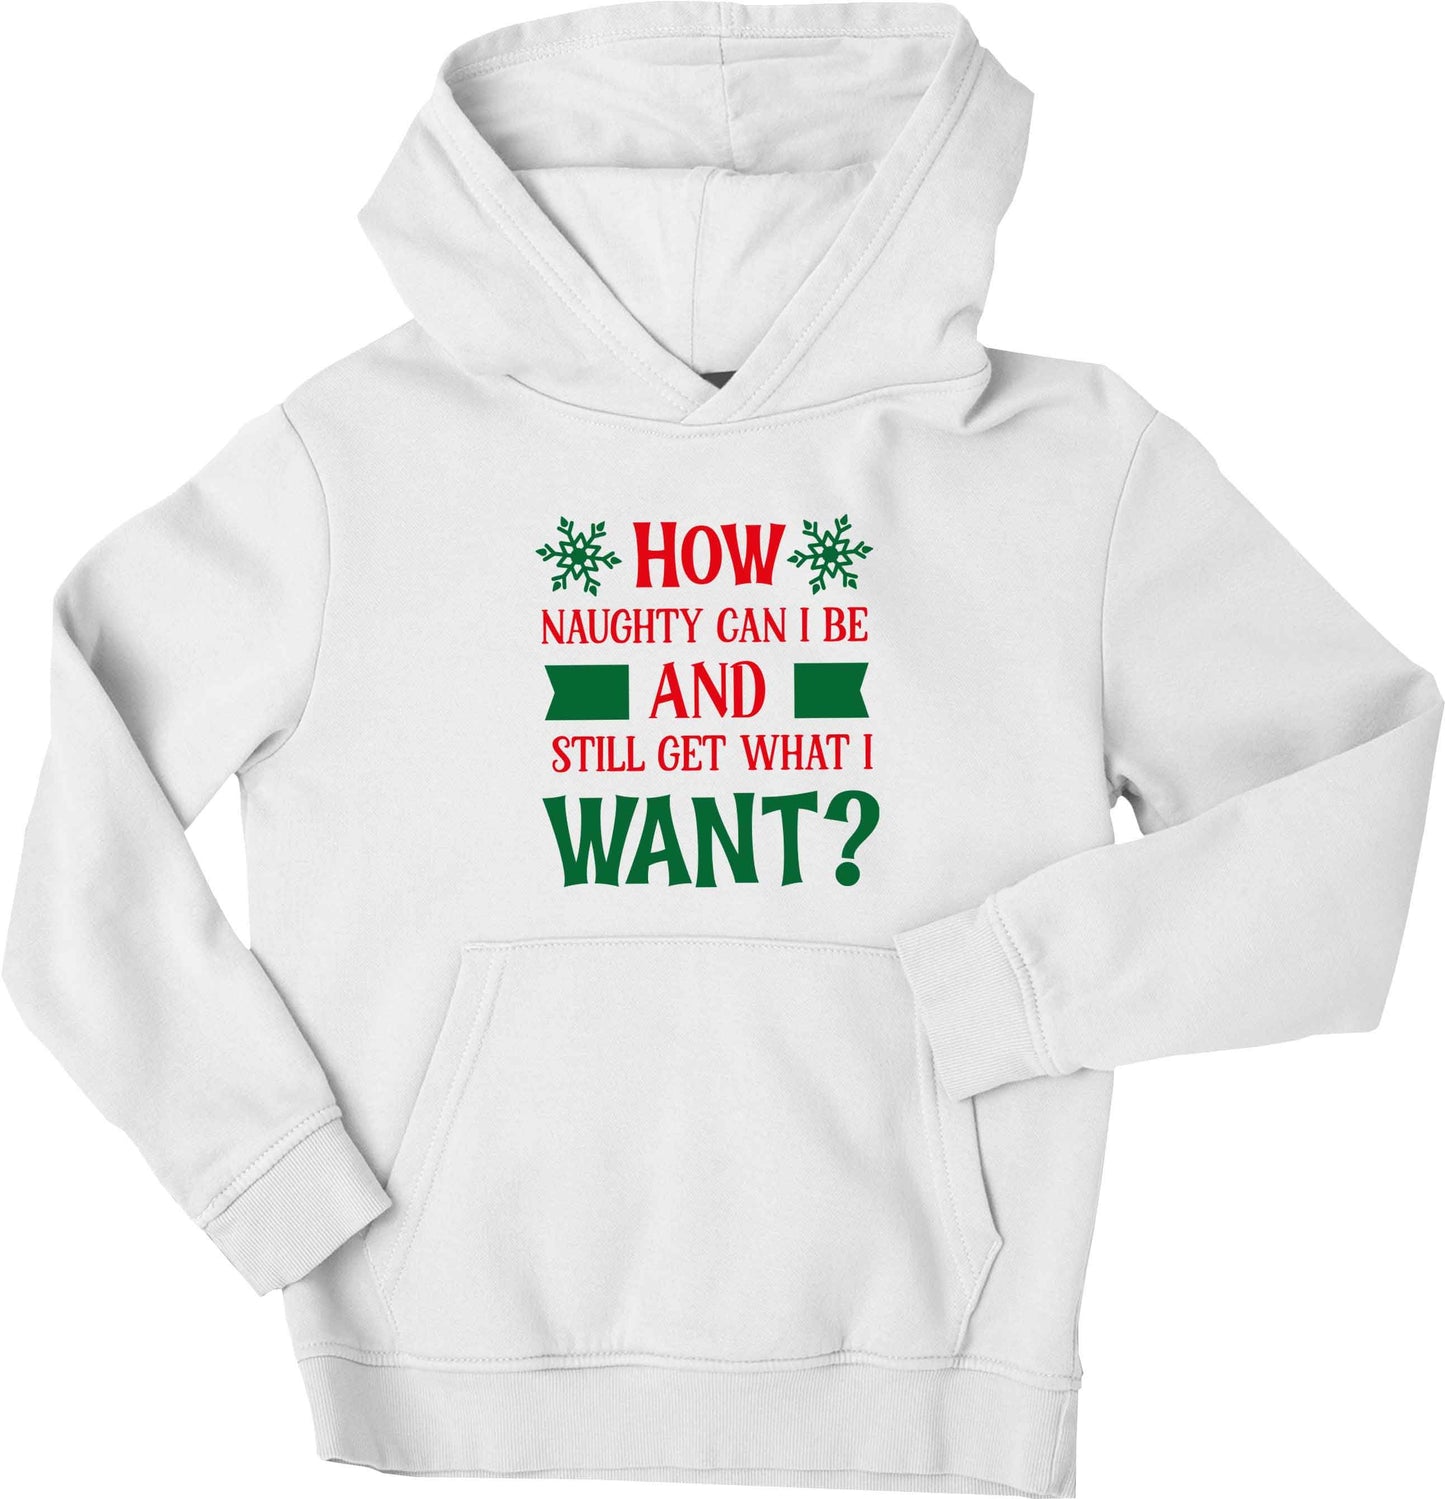 How naughty can I be and still get what I want? children's white hoodie 12-13 Years